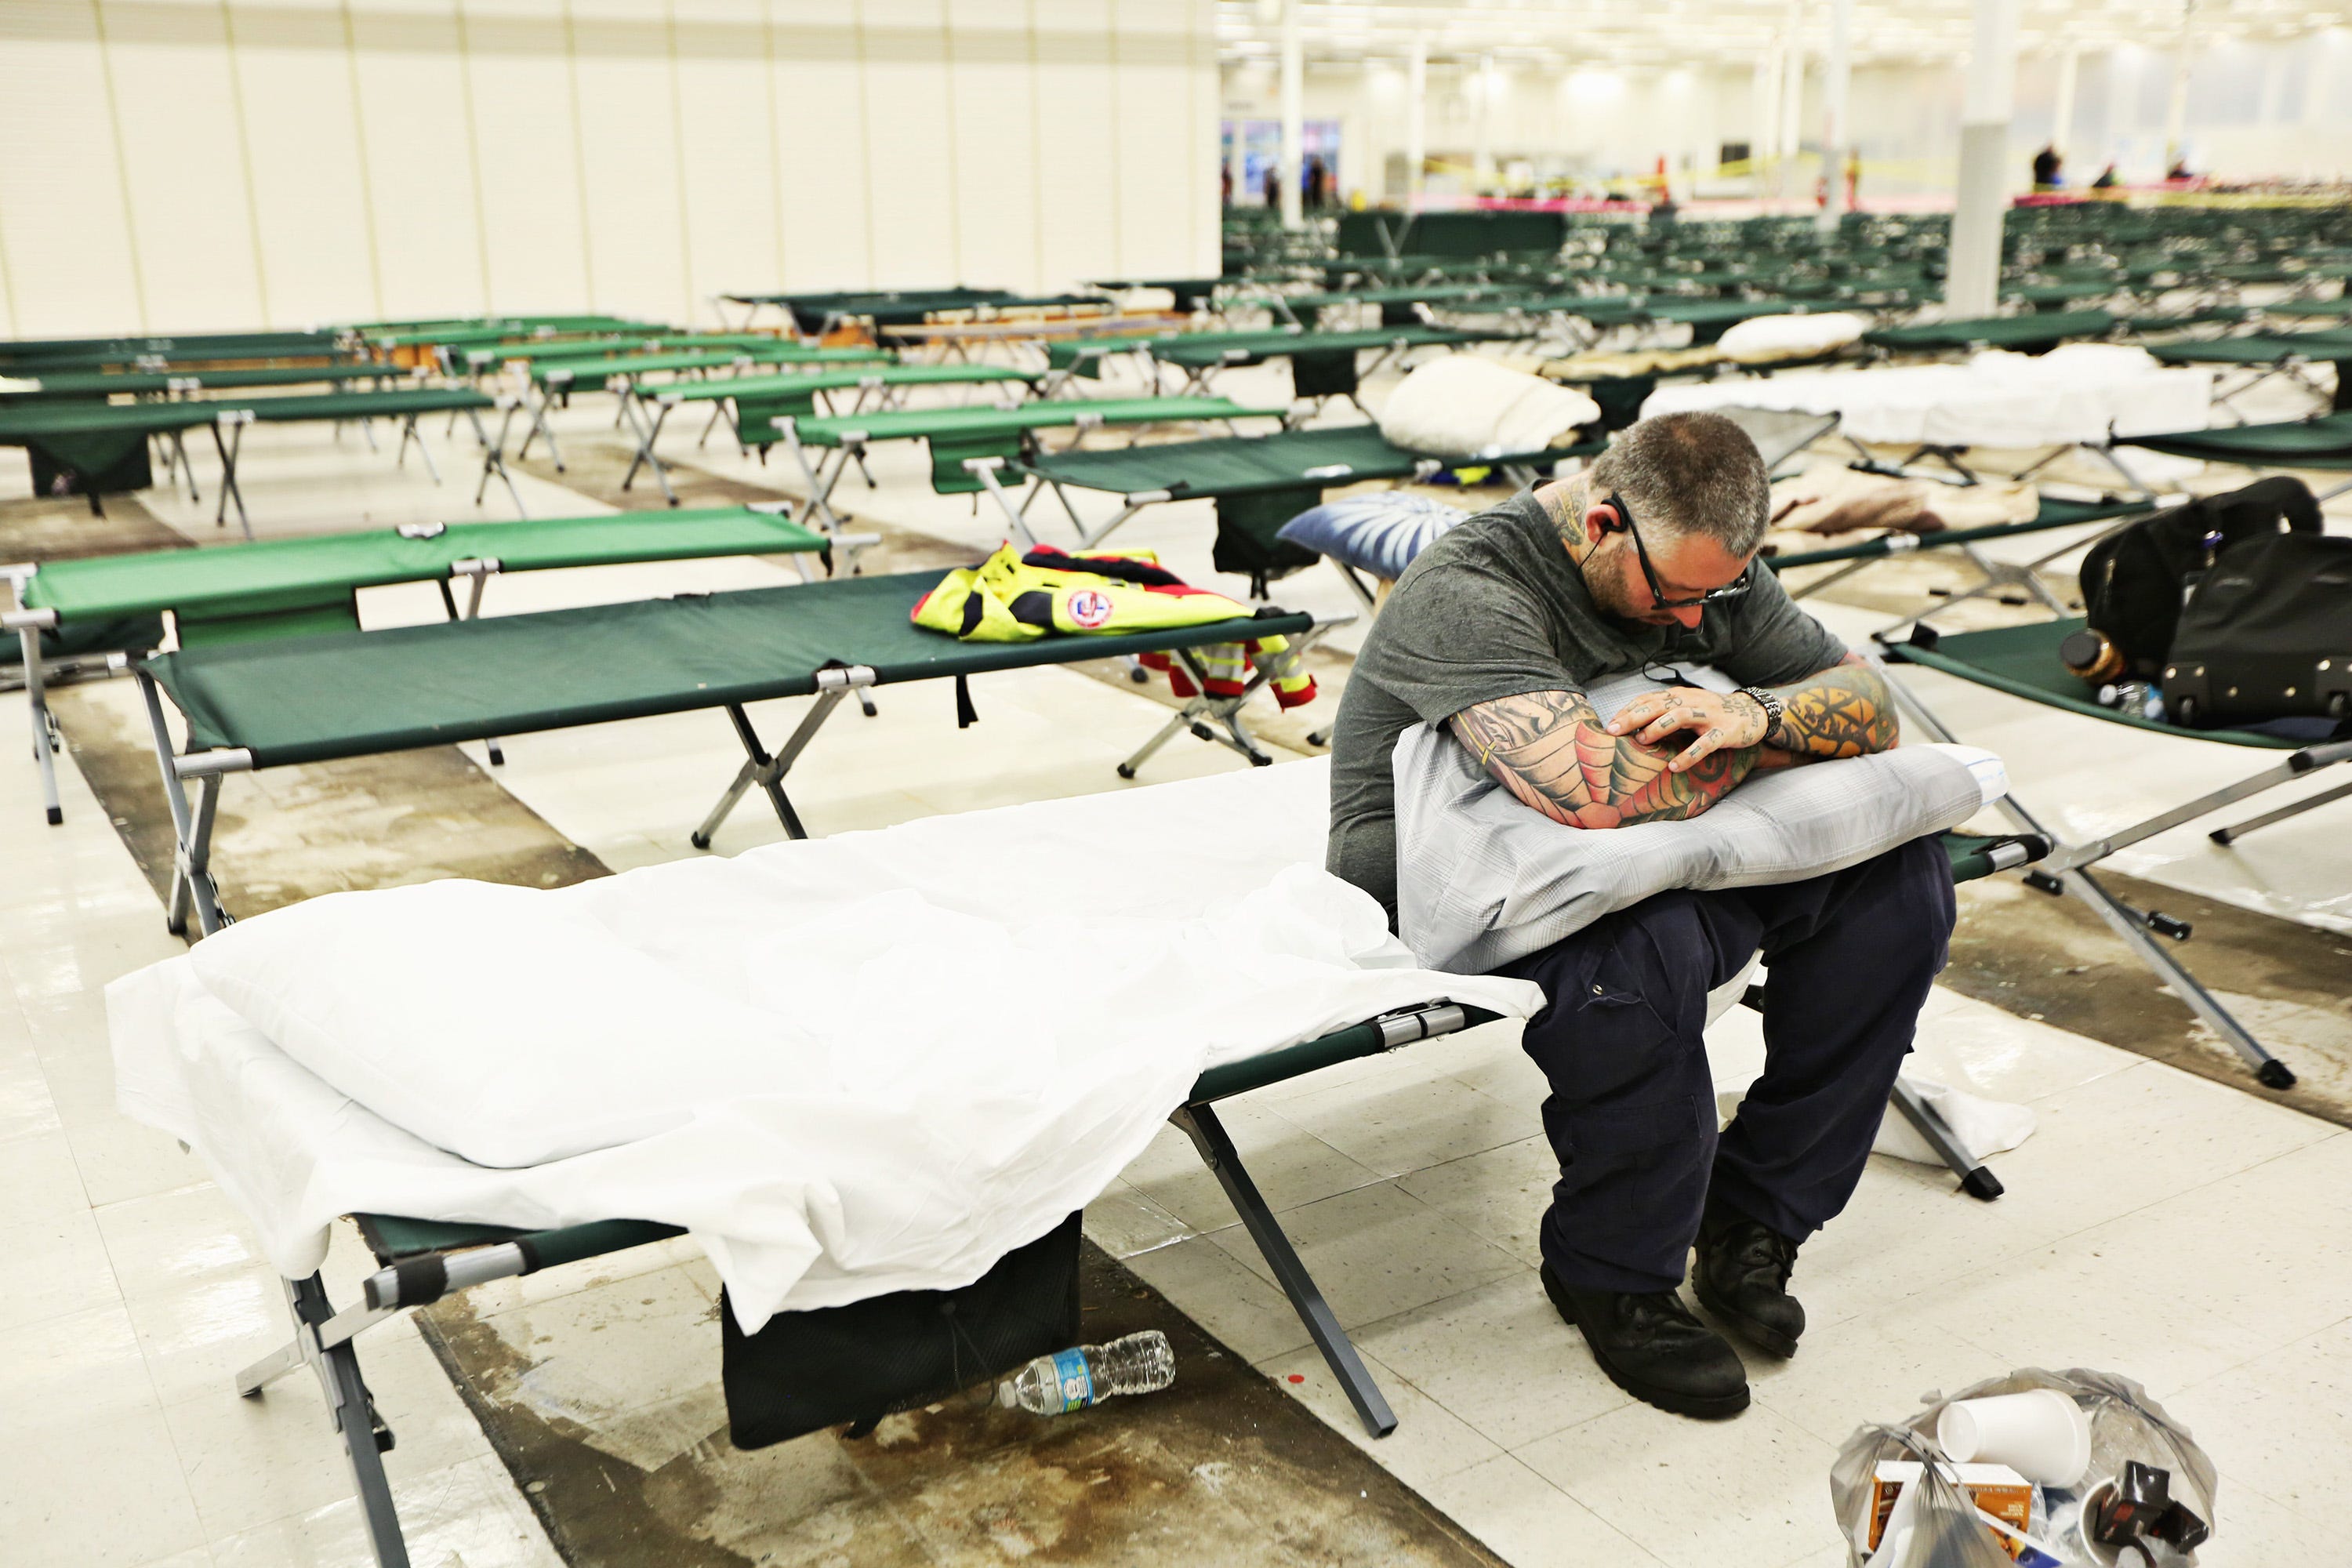 Raffi Hovsepian, a critical care paramedic with All County Ambulance, plugs in earbuds and tries to relax Friday morning, Sept. 14, 2018, in an old Kmart in Garner used as a makeshift shelter for first responders traveling to the state from other areas to wait for assignments to help with Hurricane Florence. Hovsepian travelled with a crew of four men from Ft. Pierce, Fla. (Juli Leonard/The News & Observer/TNS)